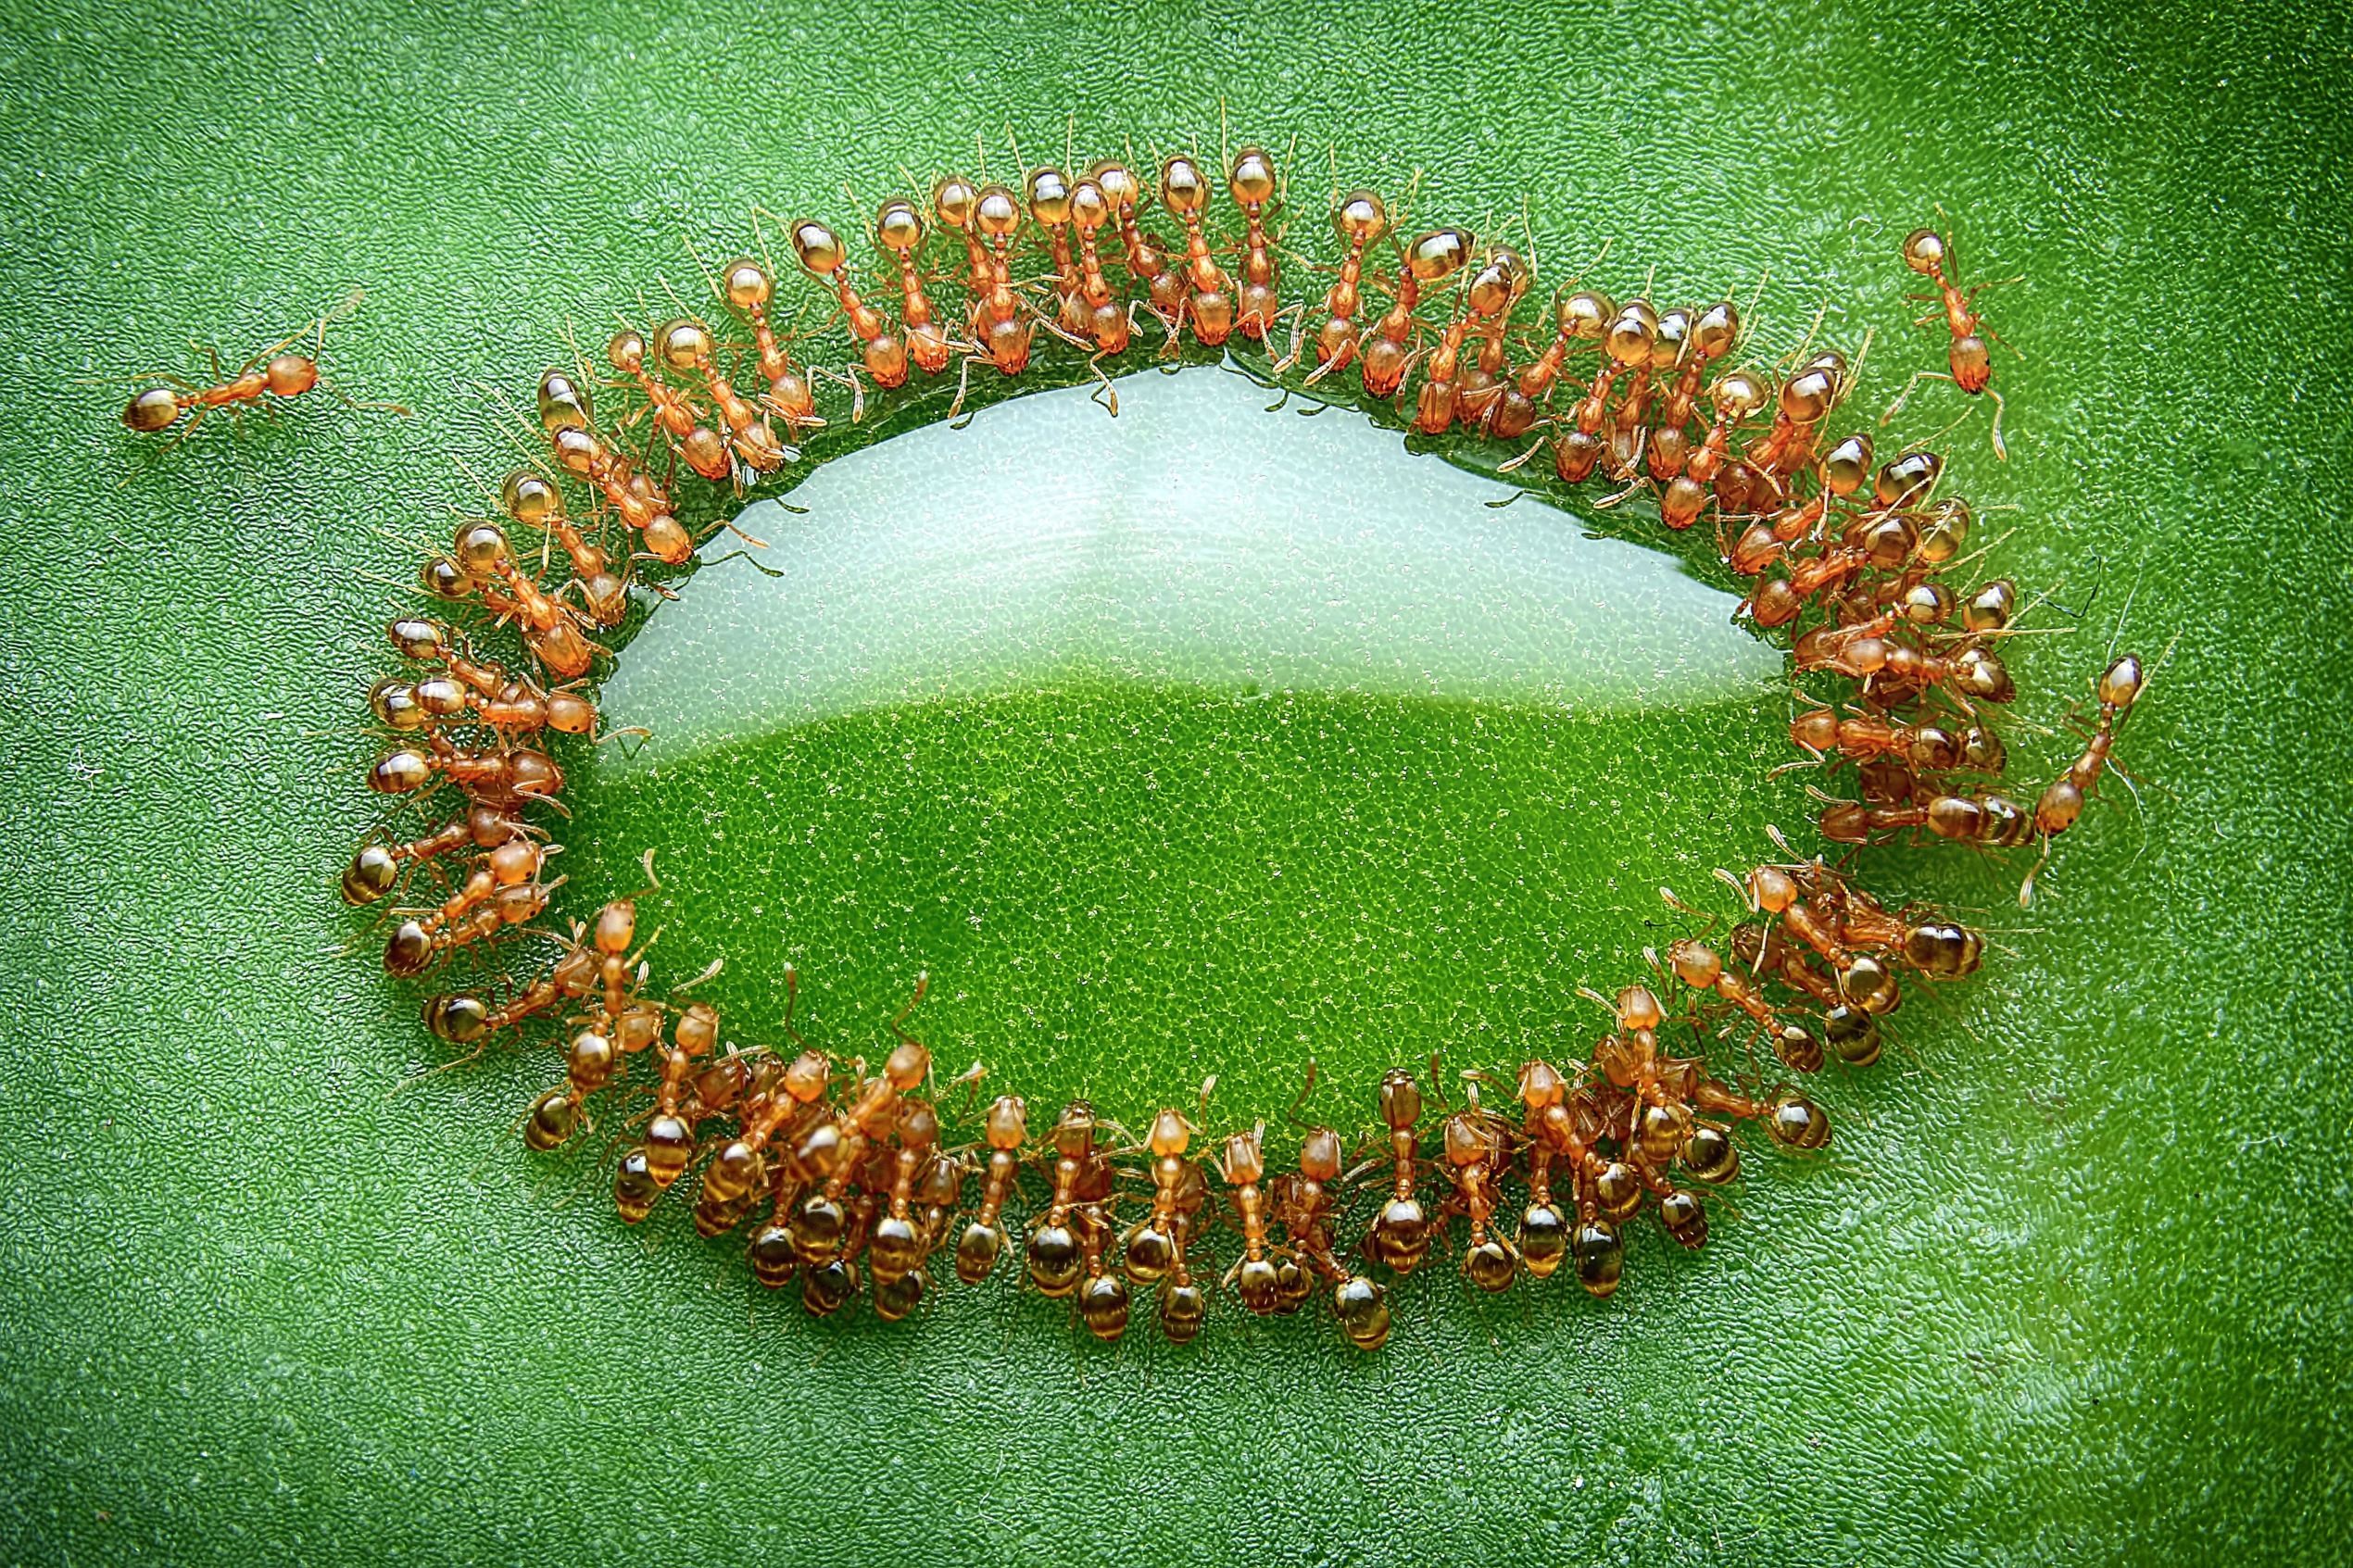 General 2540x1693 nature macro closeup leaves honey insect ants Malaysia drink National Geographic reflection green plants animals